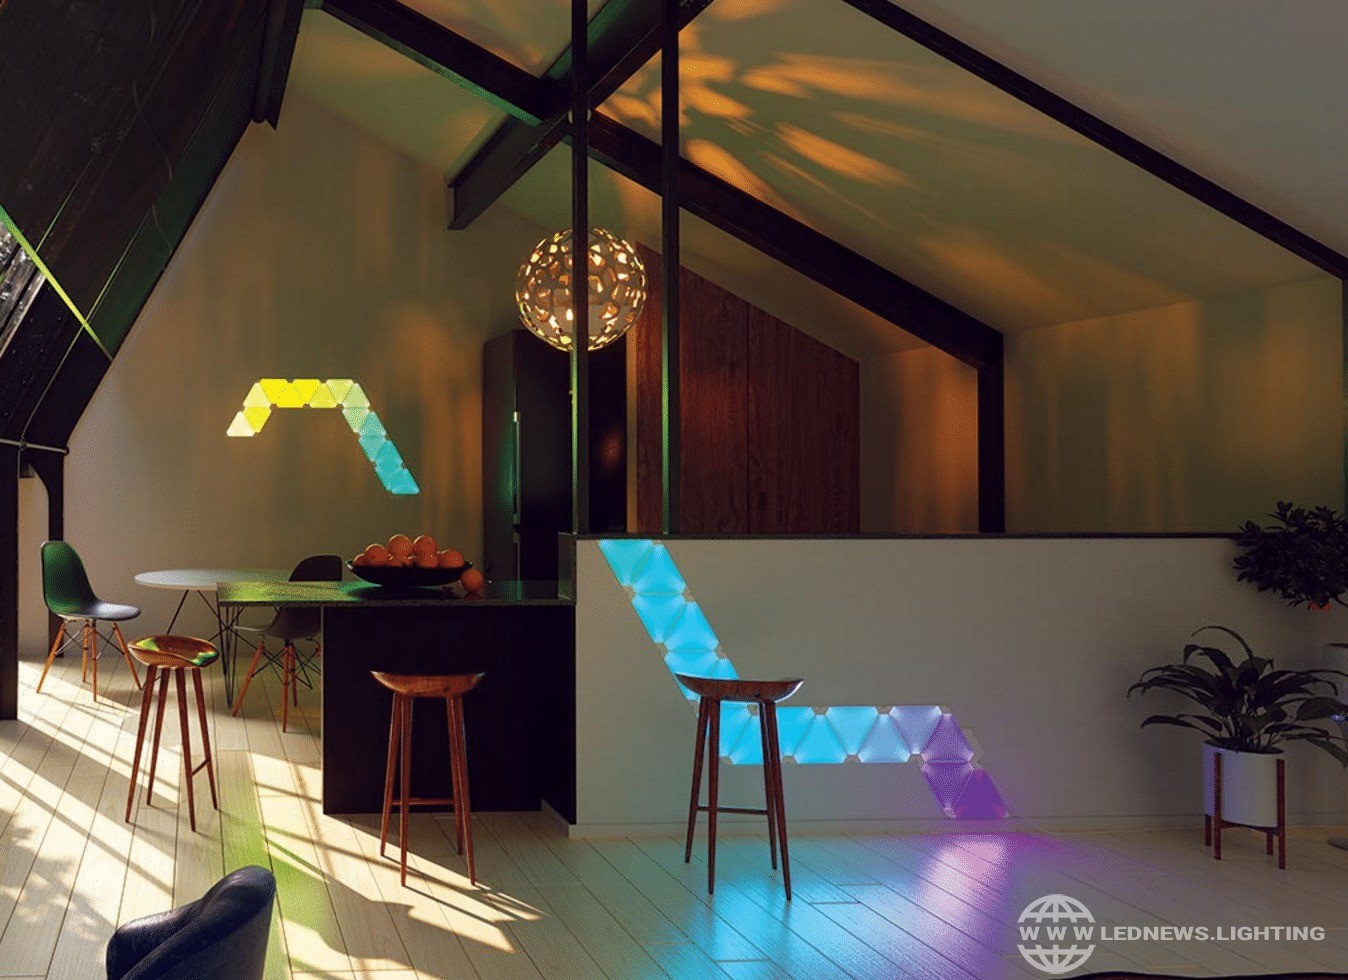 $33.37 - 155.39 Modular Smart Lighting Panels LED Triangle Wall Light USB Touch Night Light RGB Ambient Light Remote Control Indoor Game Room Bedroom